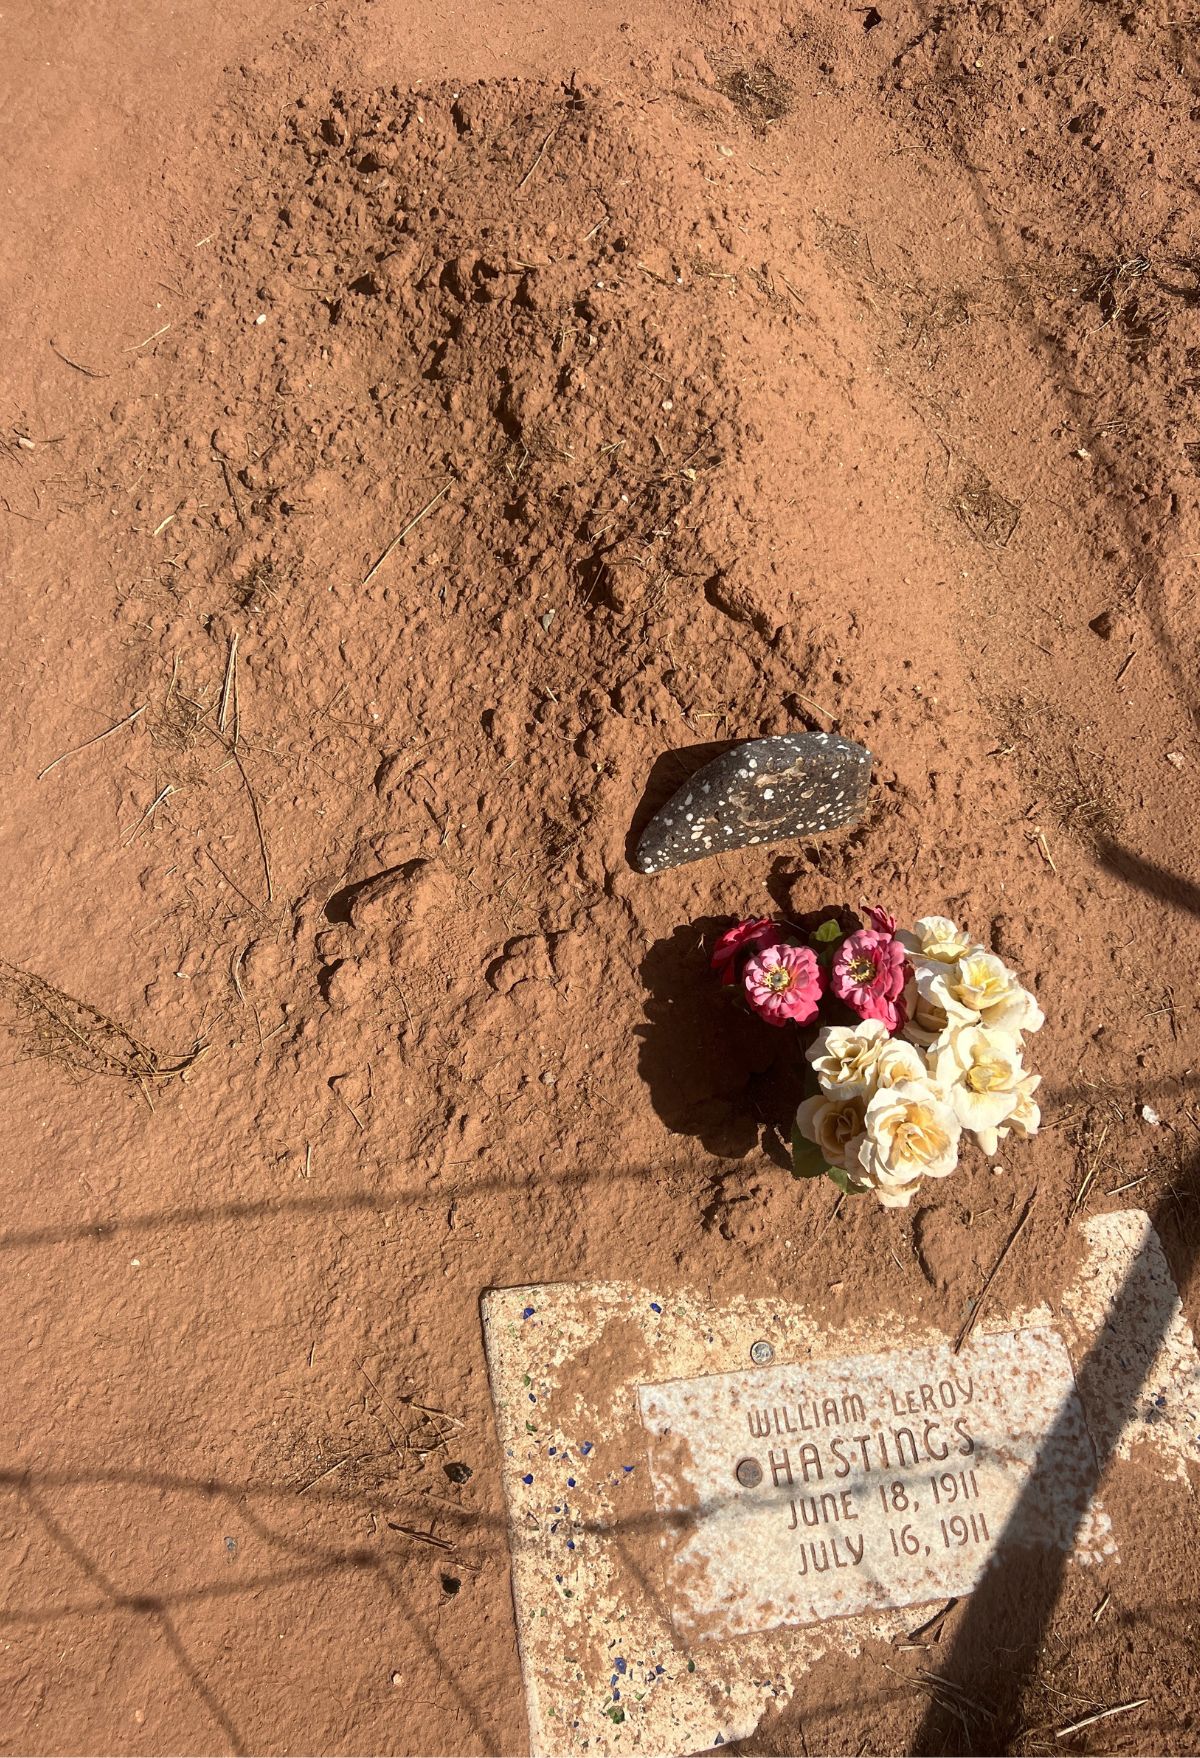 A grave with flowers and a rock next to it.